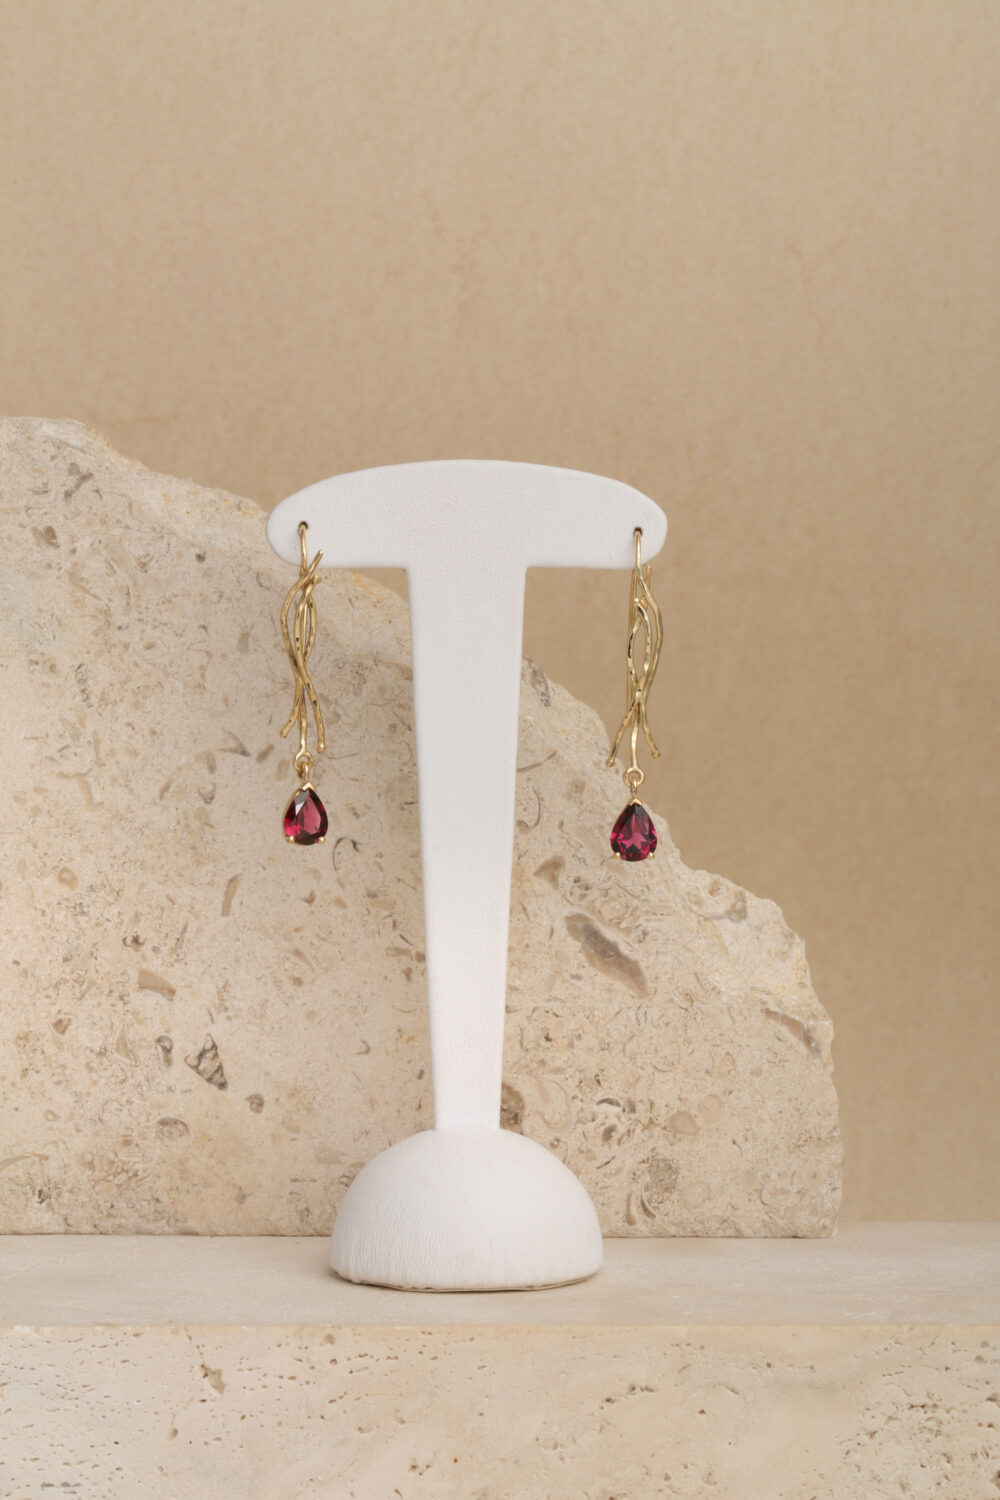 Rhodolite Garnet earrings crafted from 18-karat gold. All our jewellery is handmade by jewellery designer Pascale Masselis in our Antwerp based atelier.